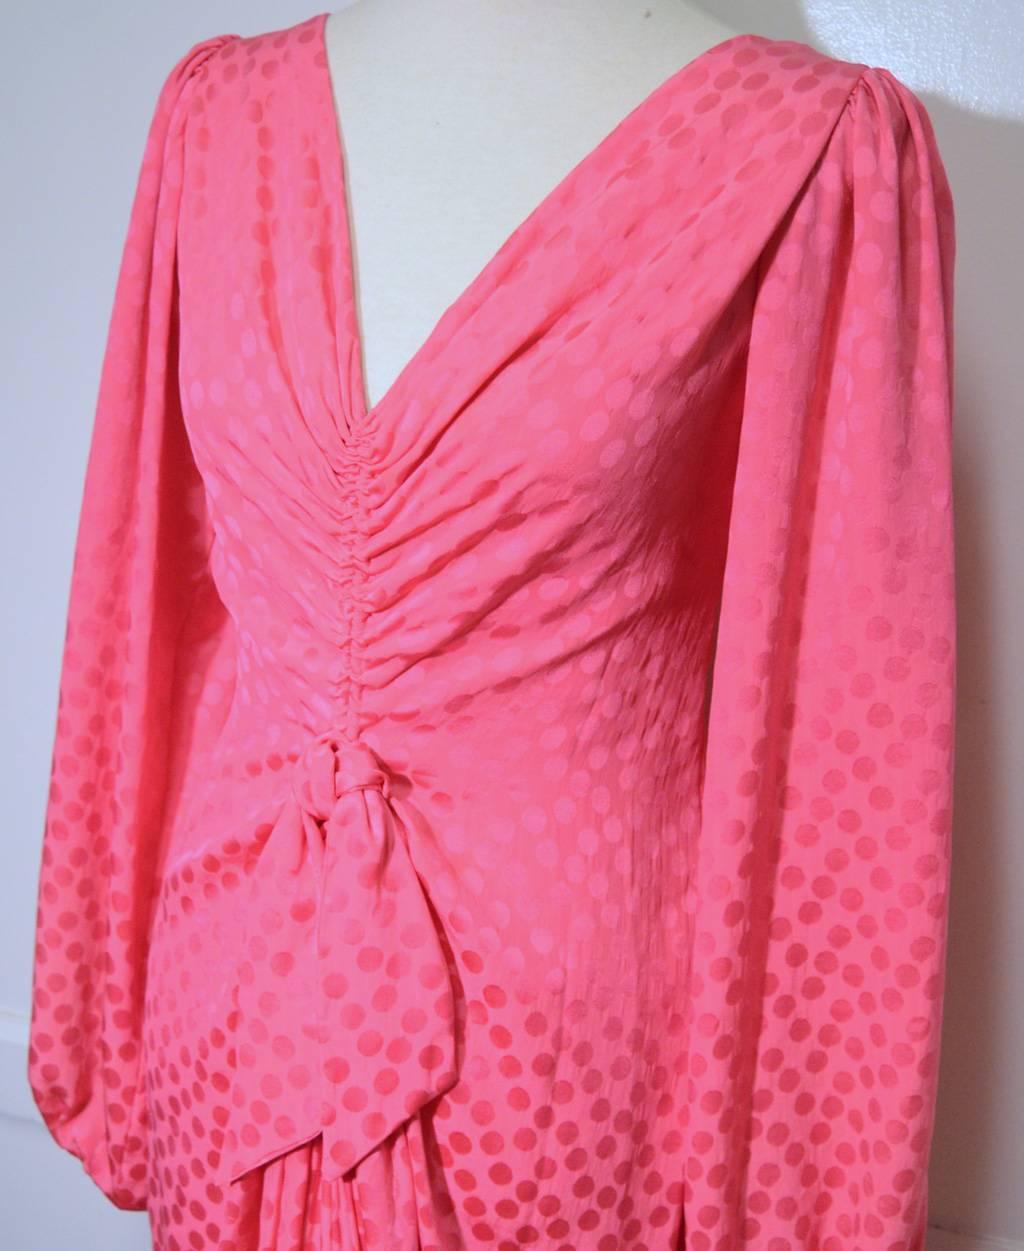 Vibrant pink silk dress by Eric Y Juan c1980s.  Bubblegum pink silk with woven polka dot design. Ruched front with bow at waist. V neck and back. 13